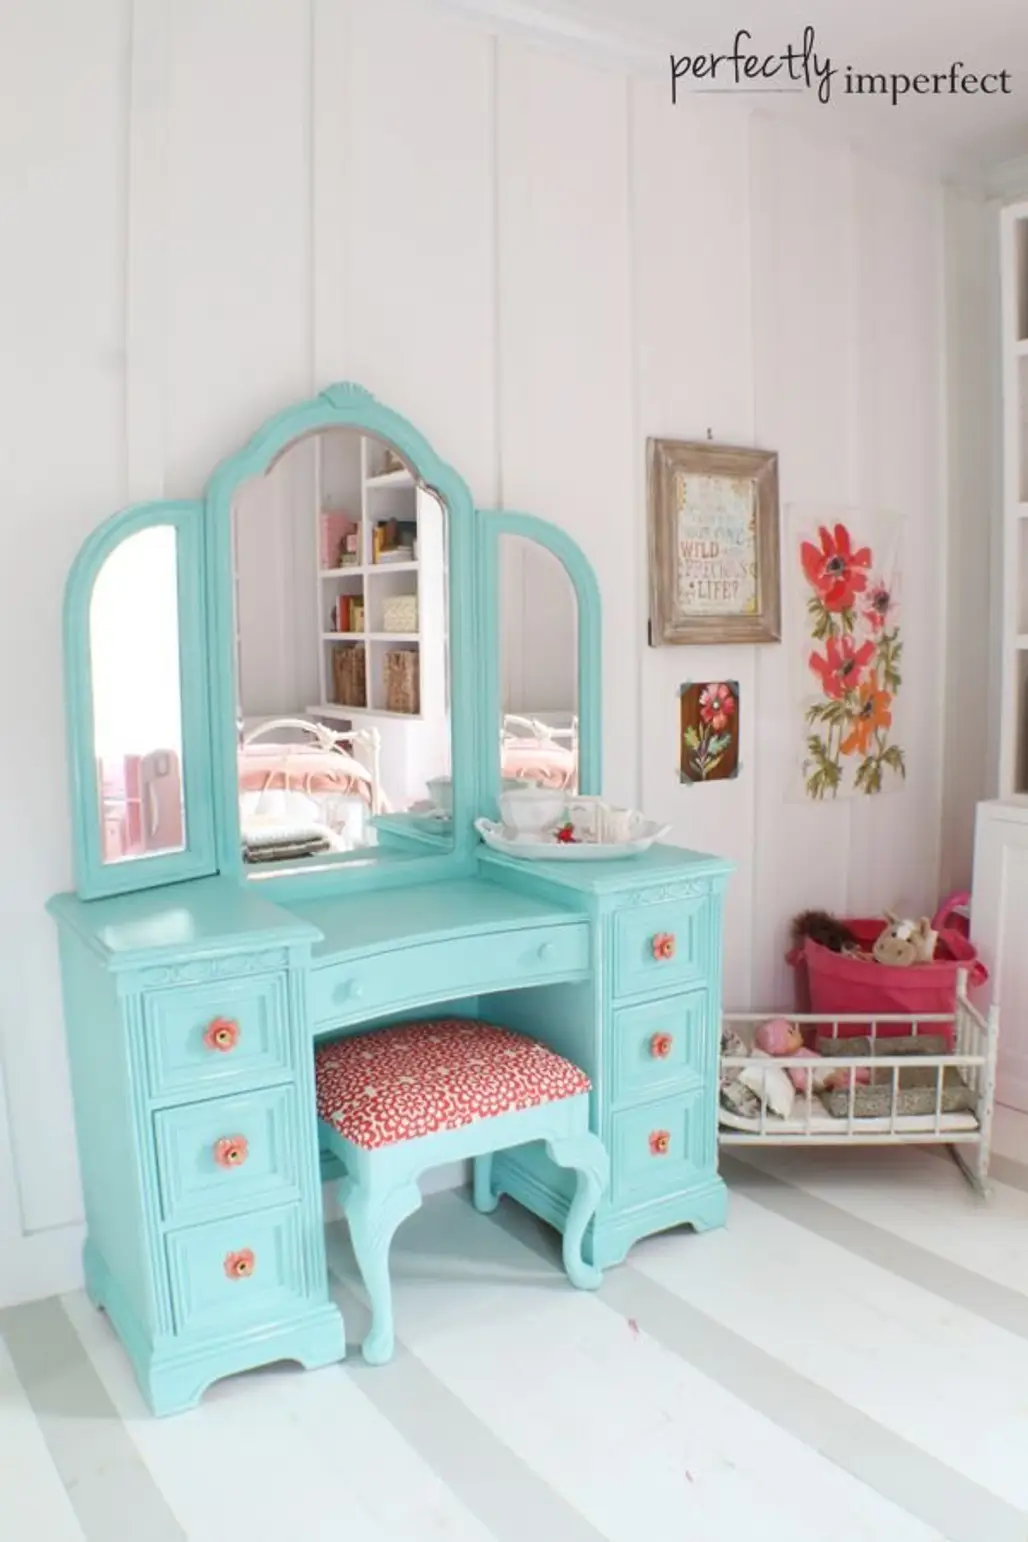 furniture,room,product,bed,bunk bed,